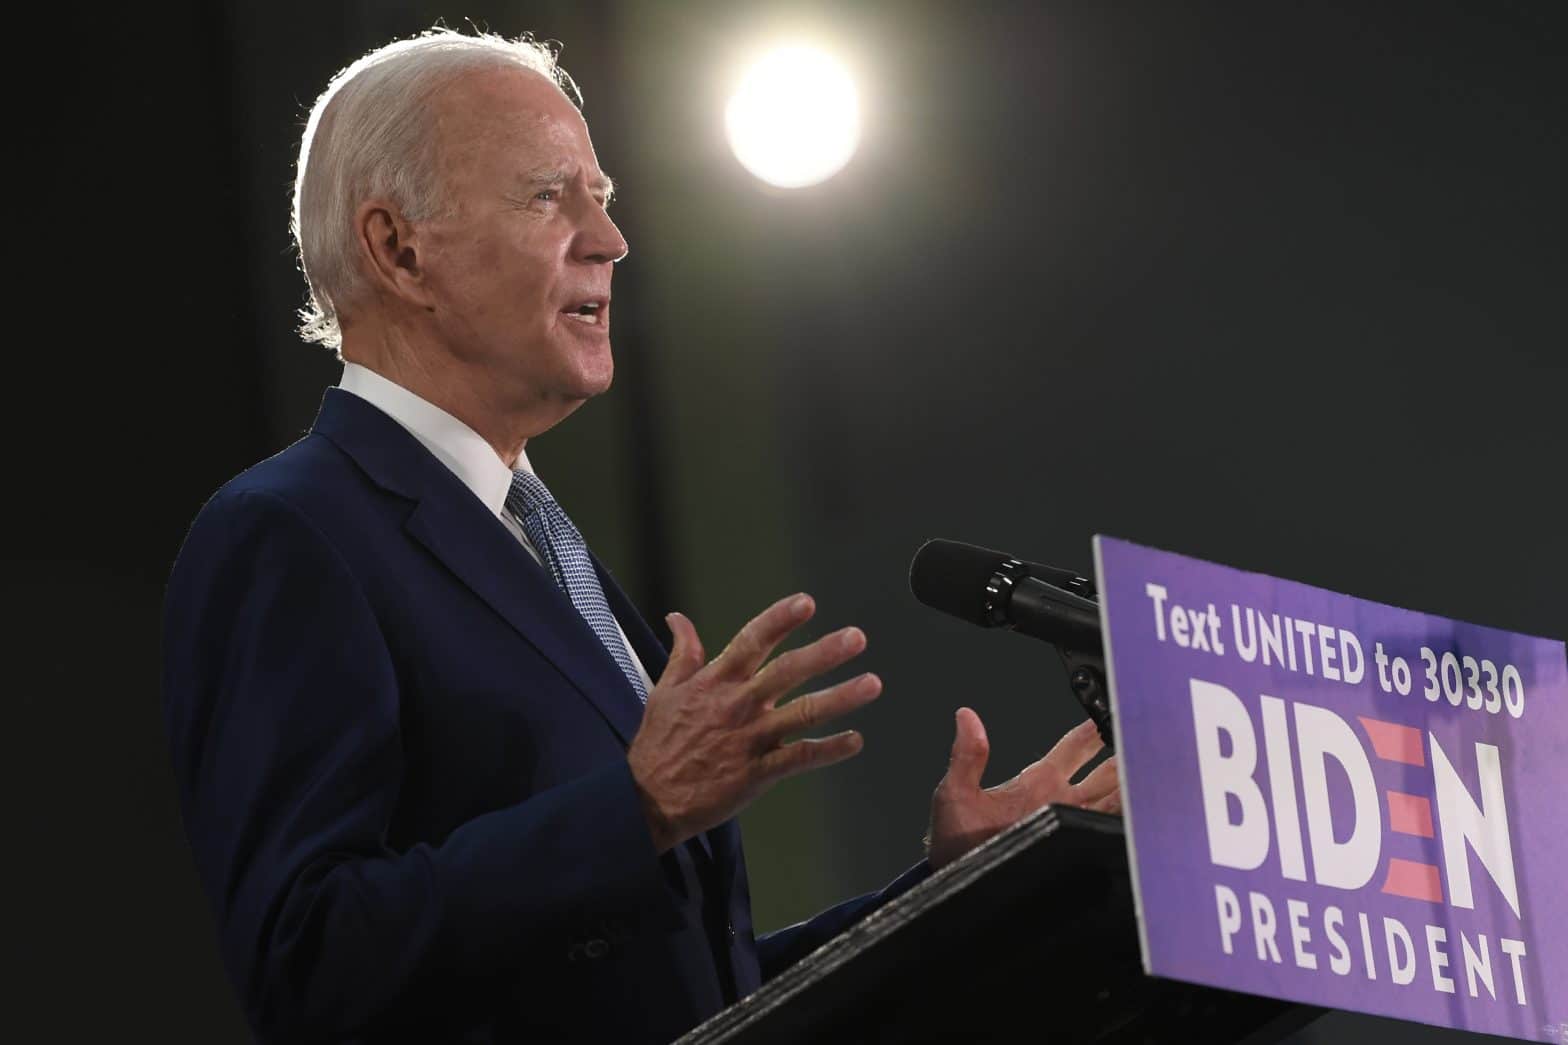 Biden Campaign Fundraising Surged in May